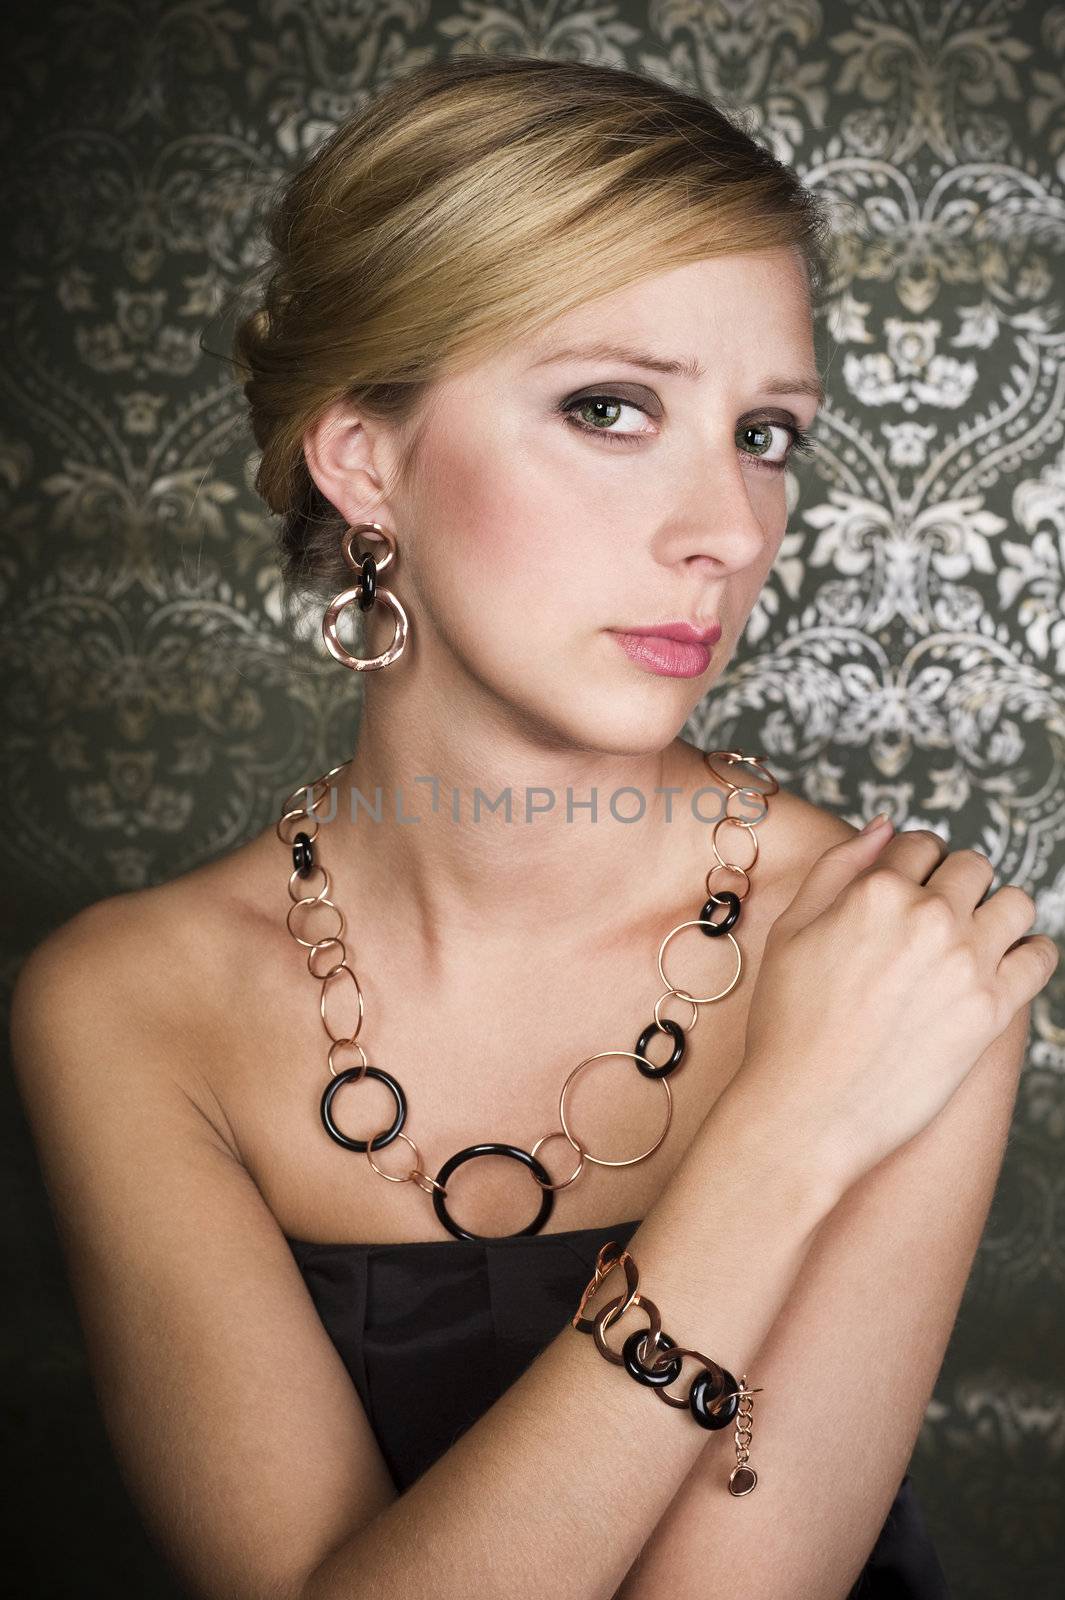 elegant woman wearing golden necklace and earring, over wallpaper background